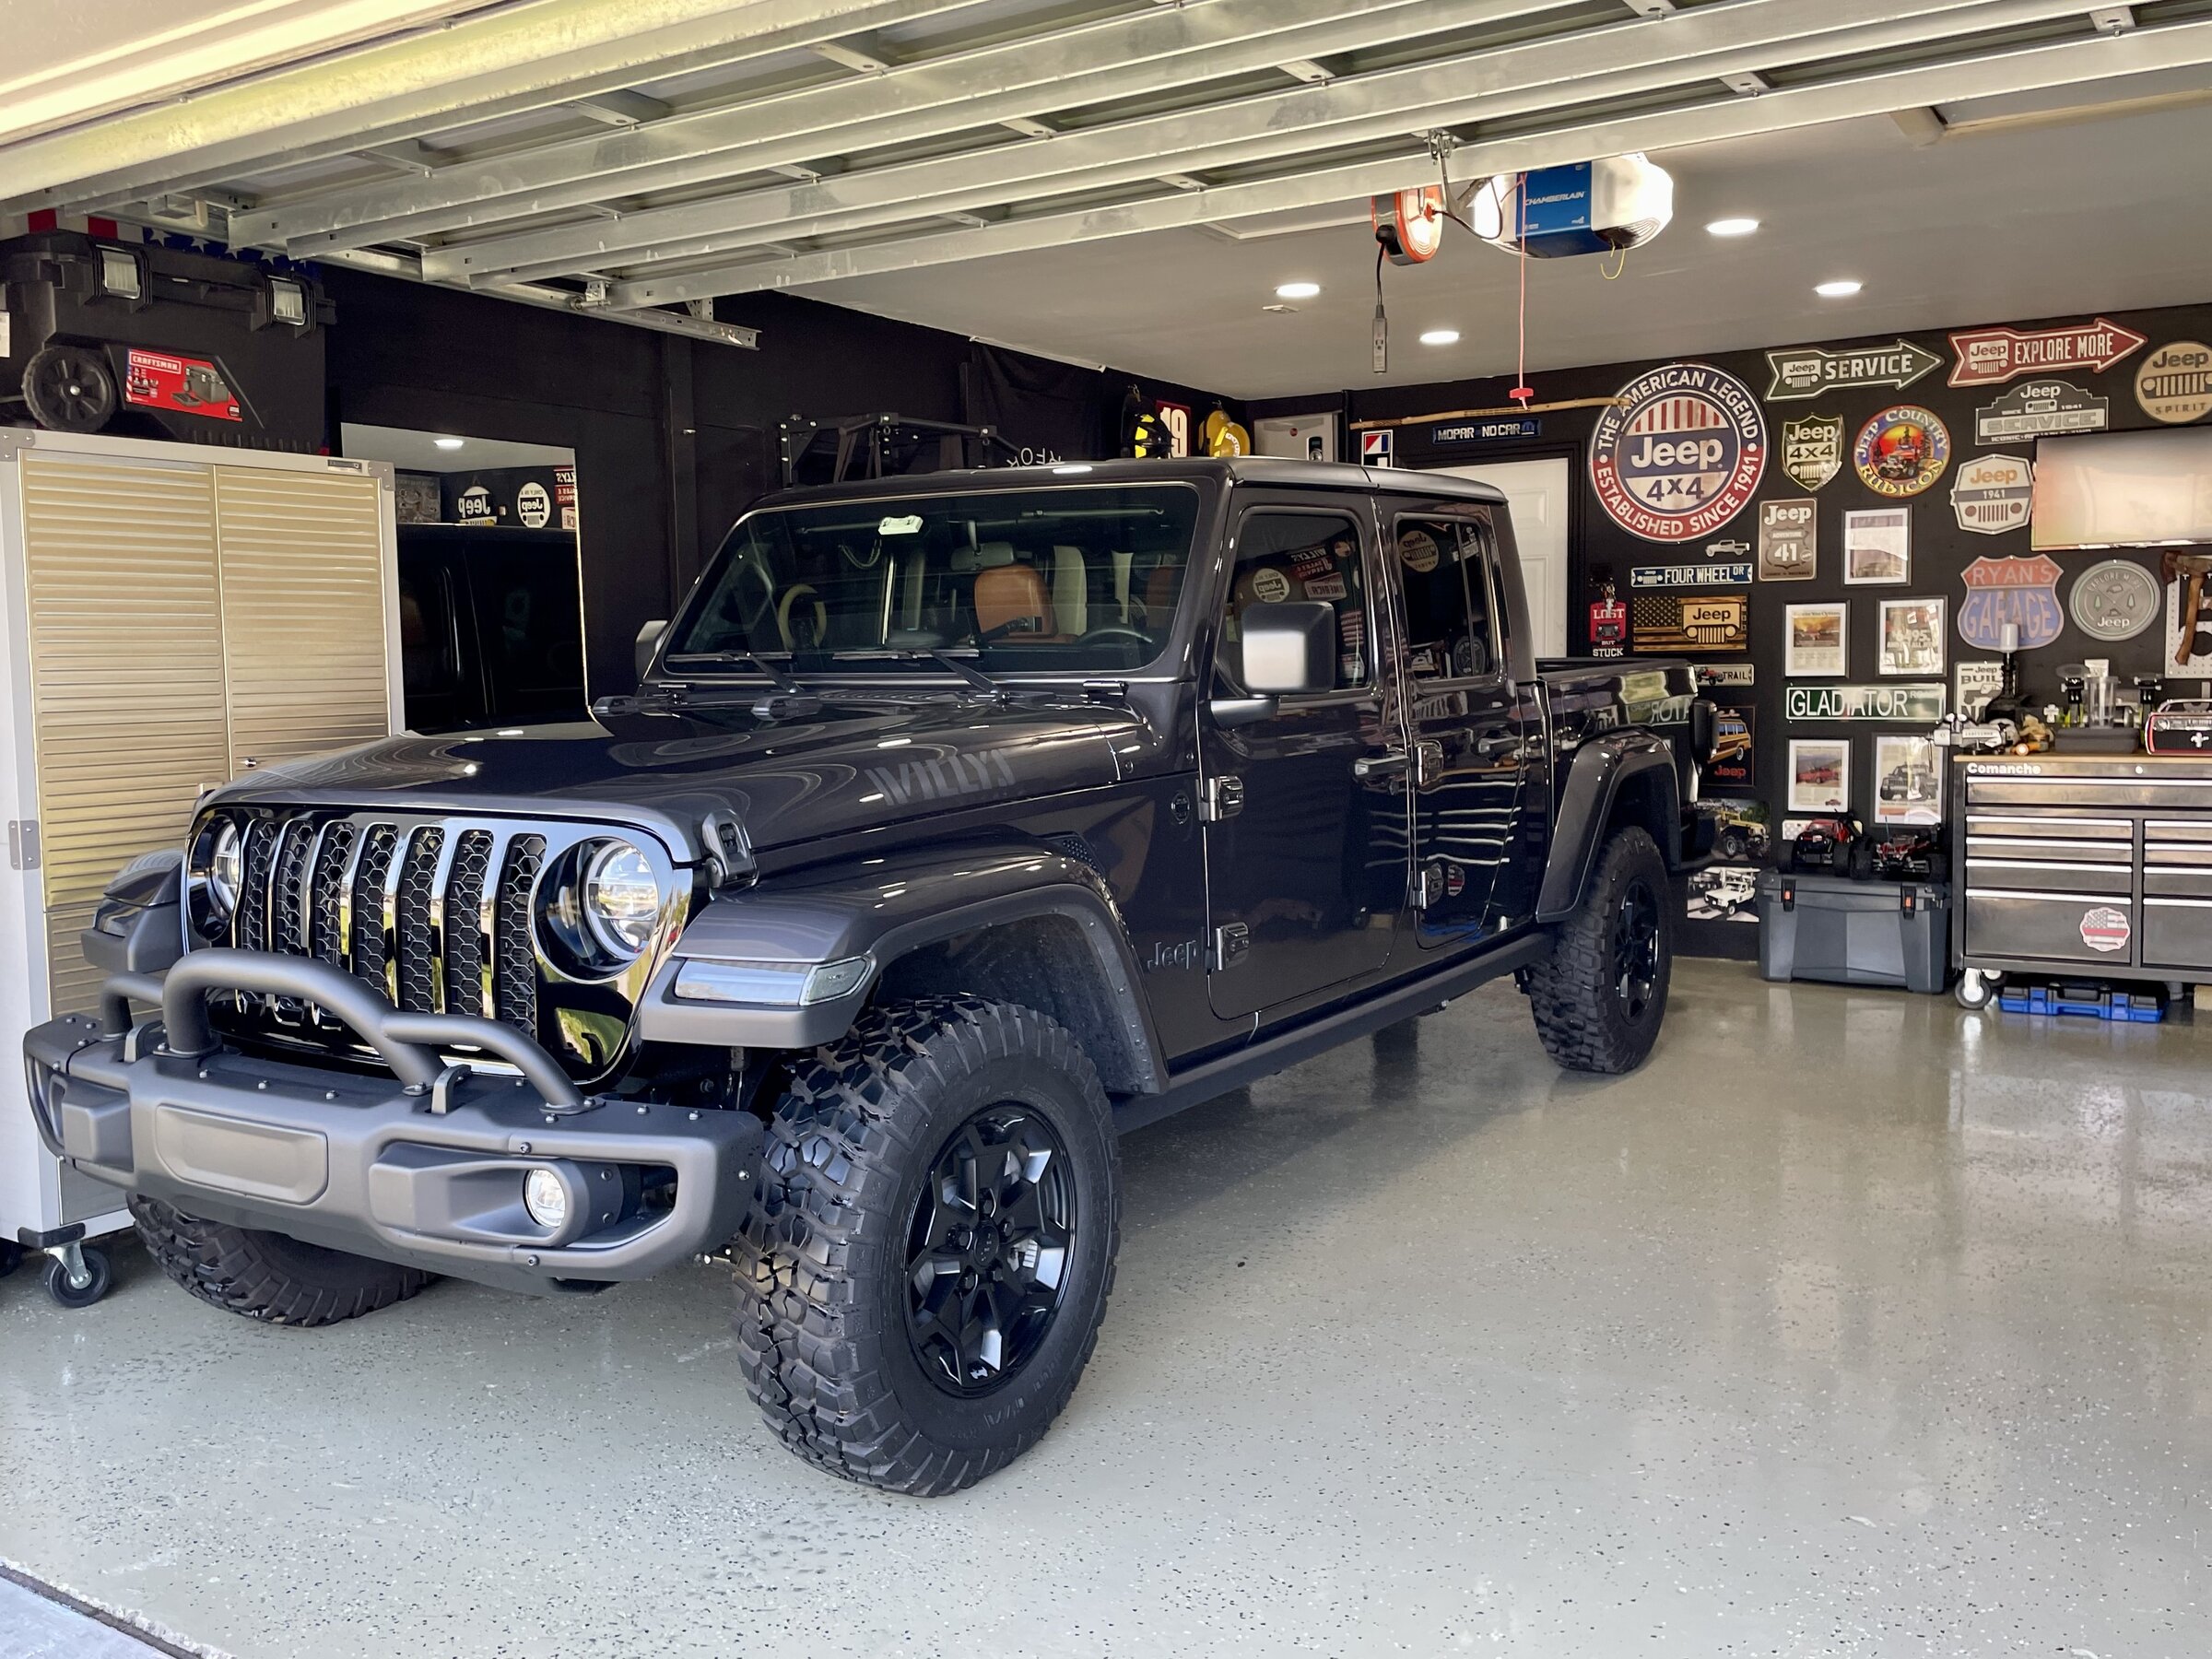 Jeep Gladiator Photo challenge.. Show me your Gladiator in your garage. 67B36D01-BB9D-4089-88E8-F3FBF1DCA791